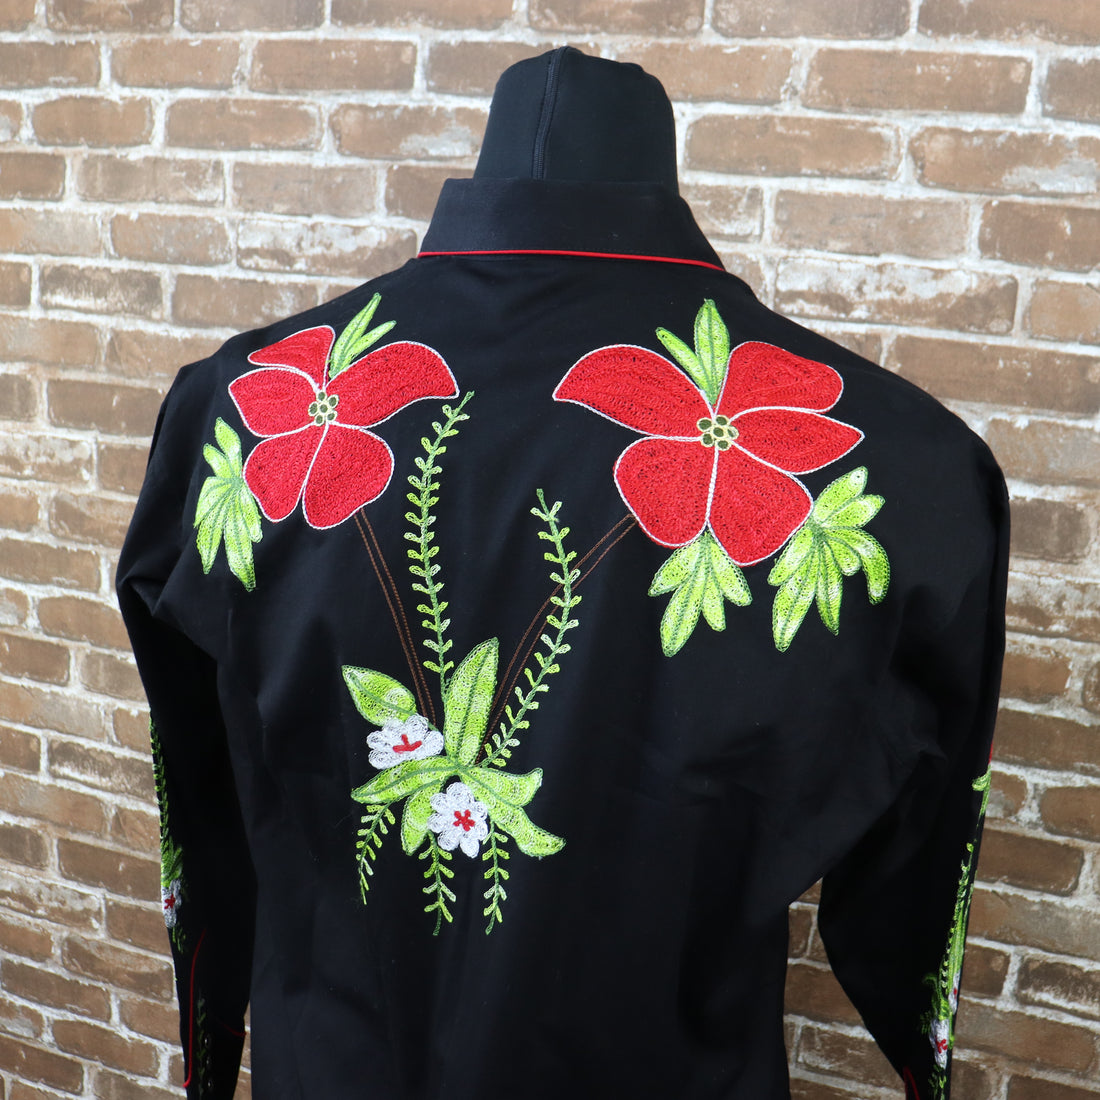 Vintage Hibiscus Flowers view of back of shirt